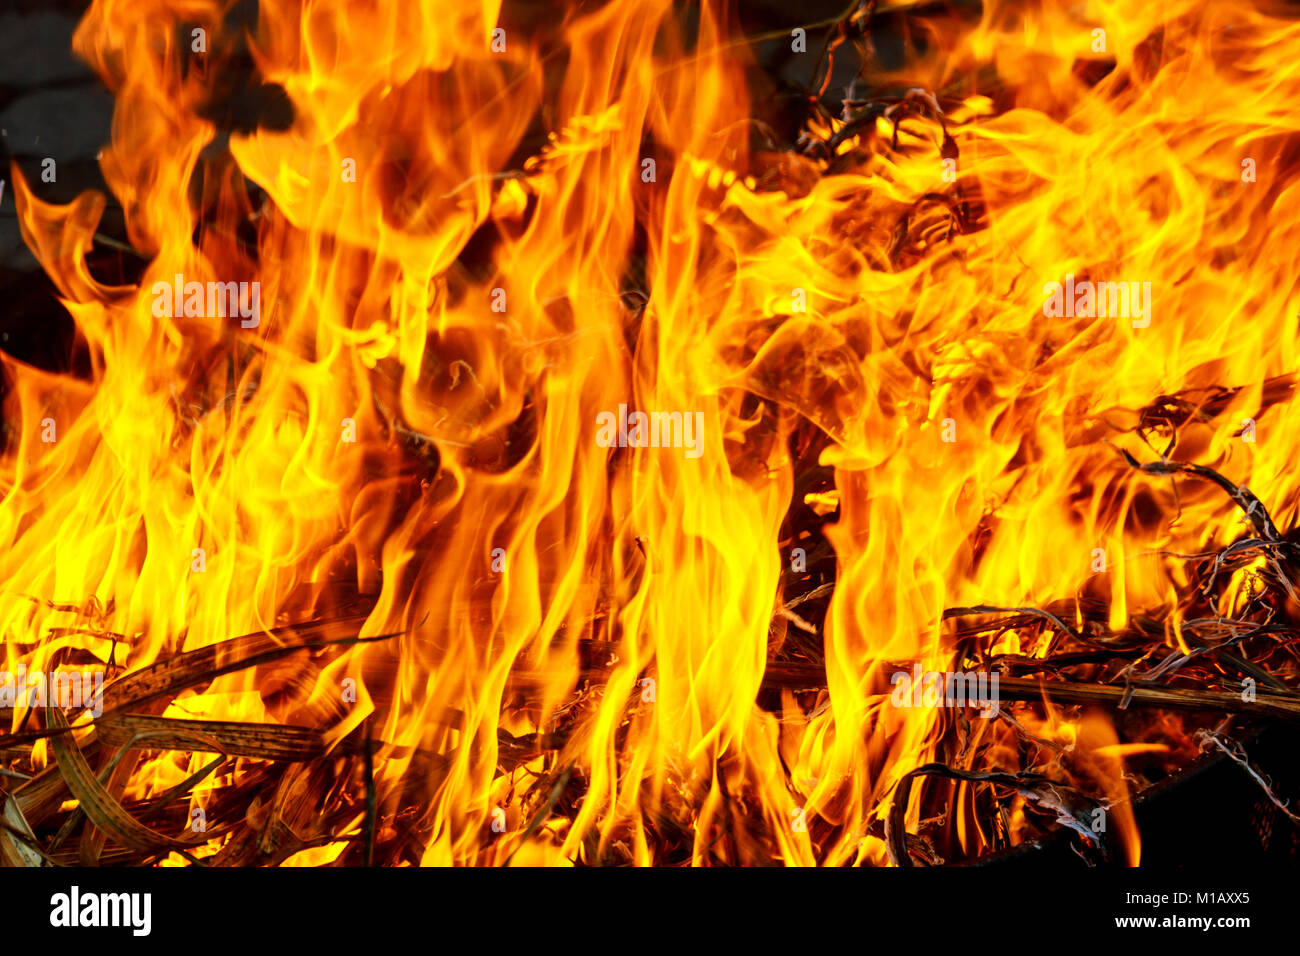 Macro shot of bonfire, white smoke, hot, glowing coal and fire. Burning branches and wood. fire burns grass and branches Stock Photo